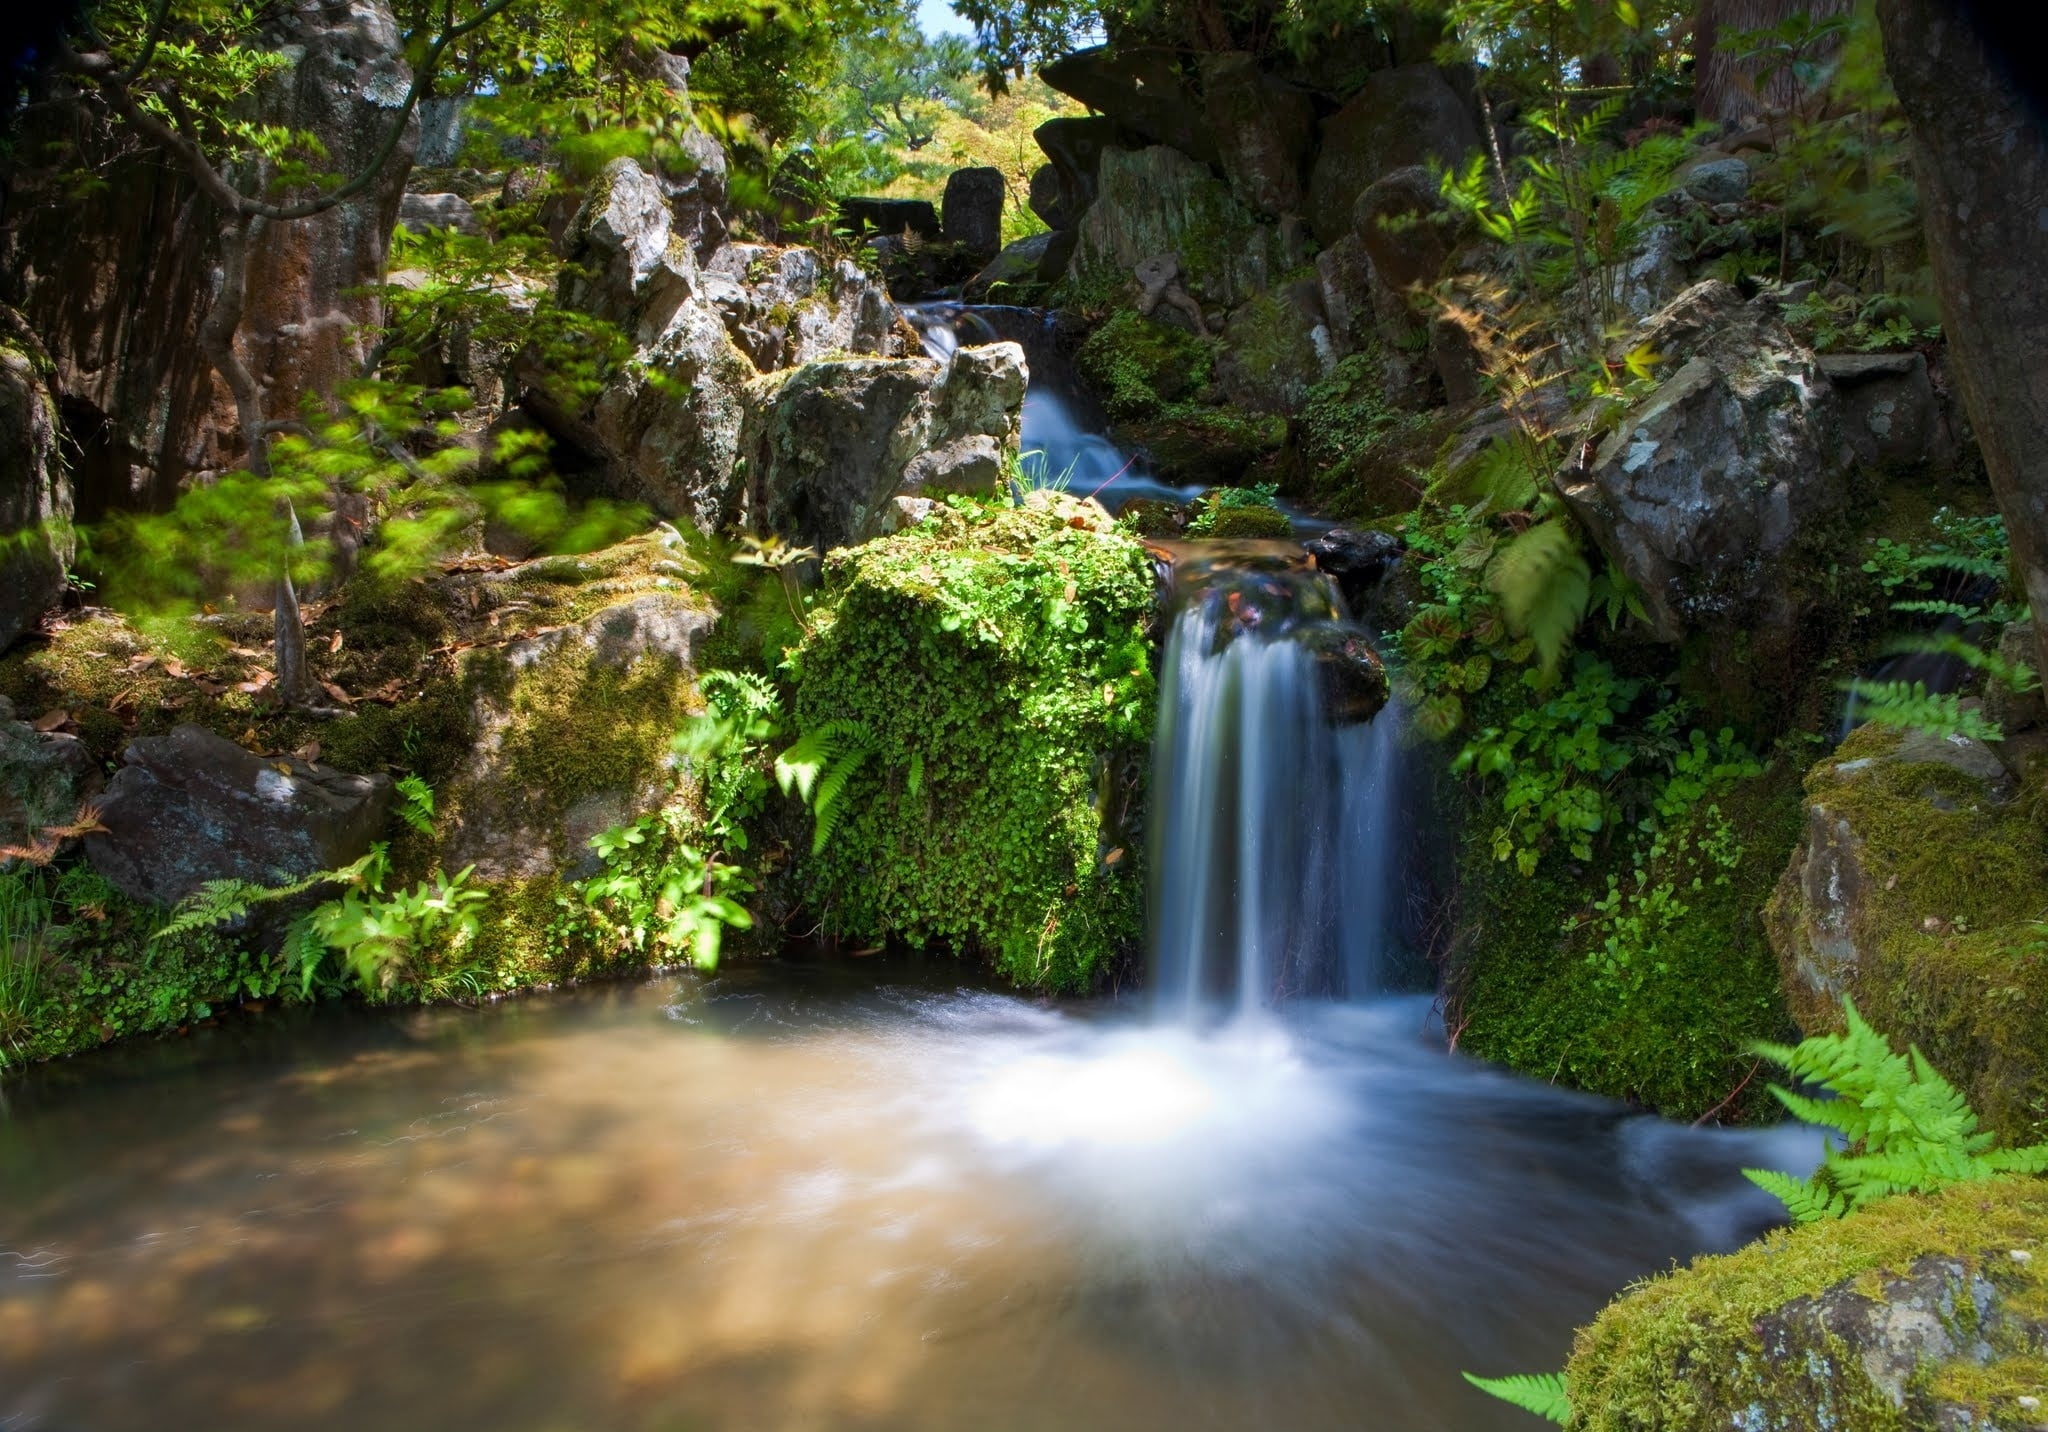 time lapsed photo of small water falls during daytime